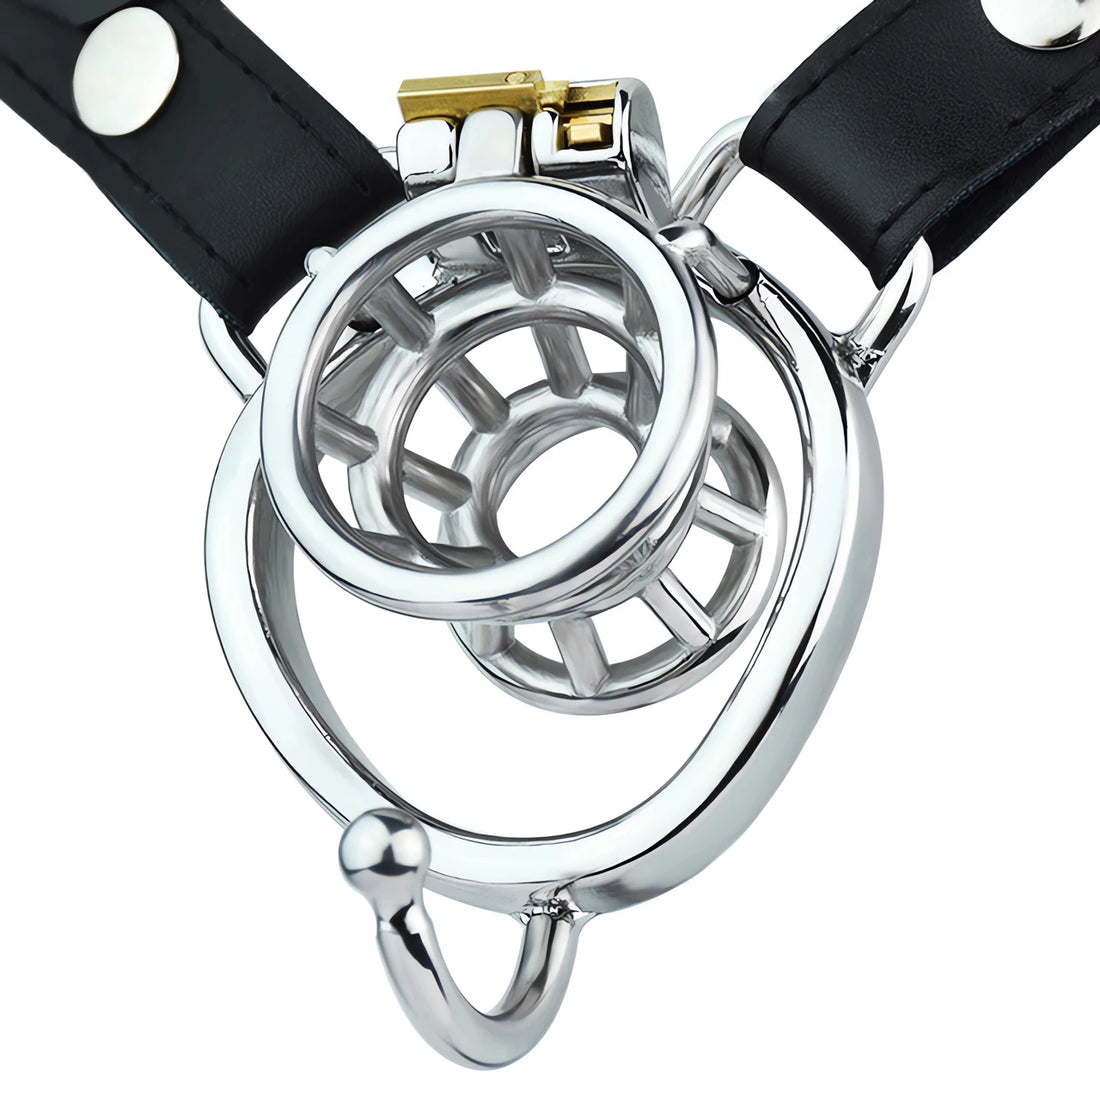 Comfortable Strap On Belt Reverse Innie Cage Lock The Cock Cage Product For Sale Image 1